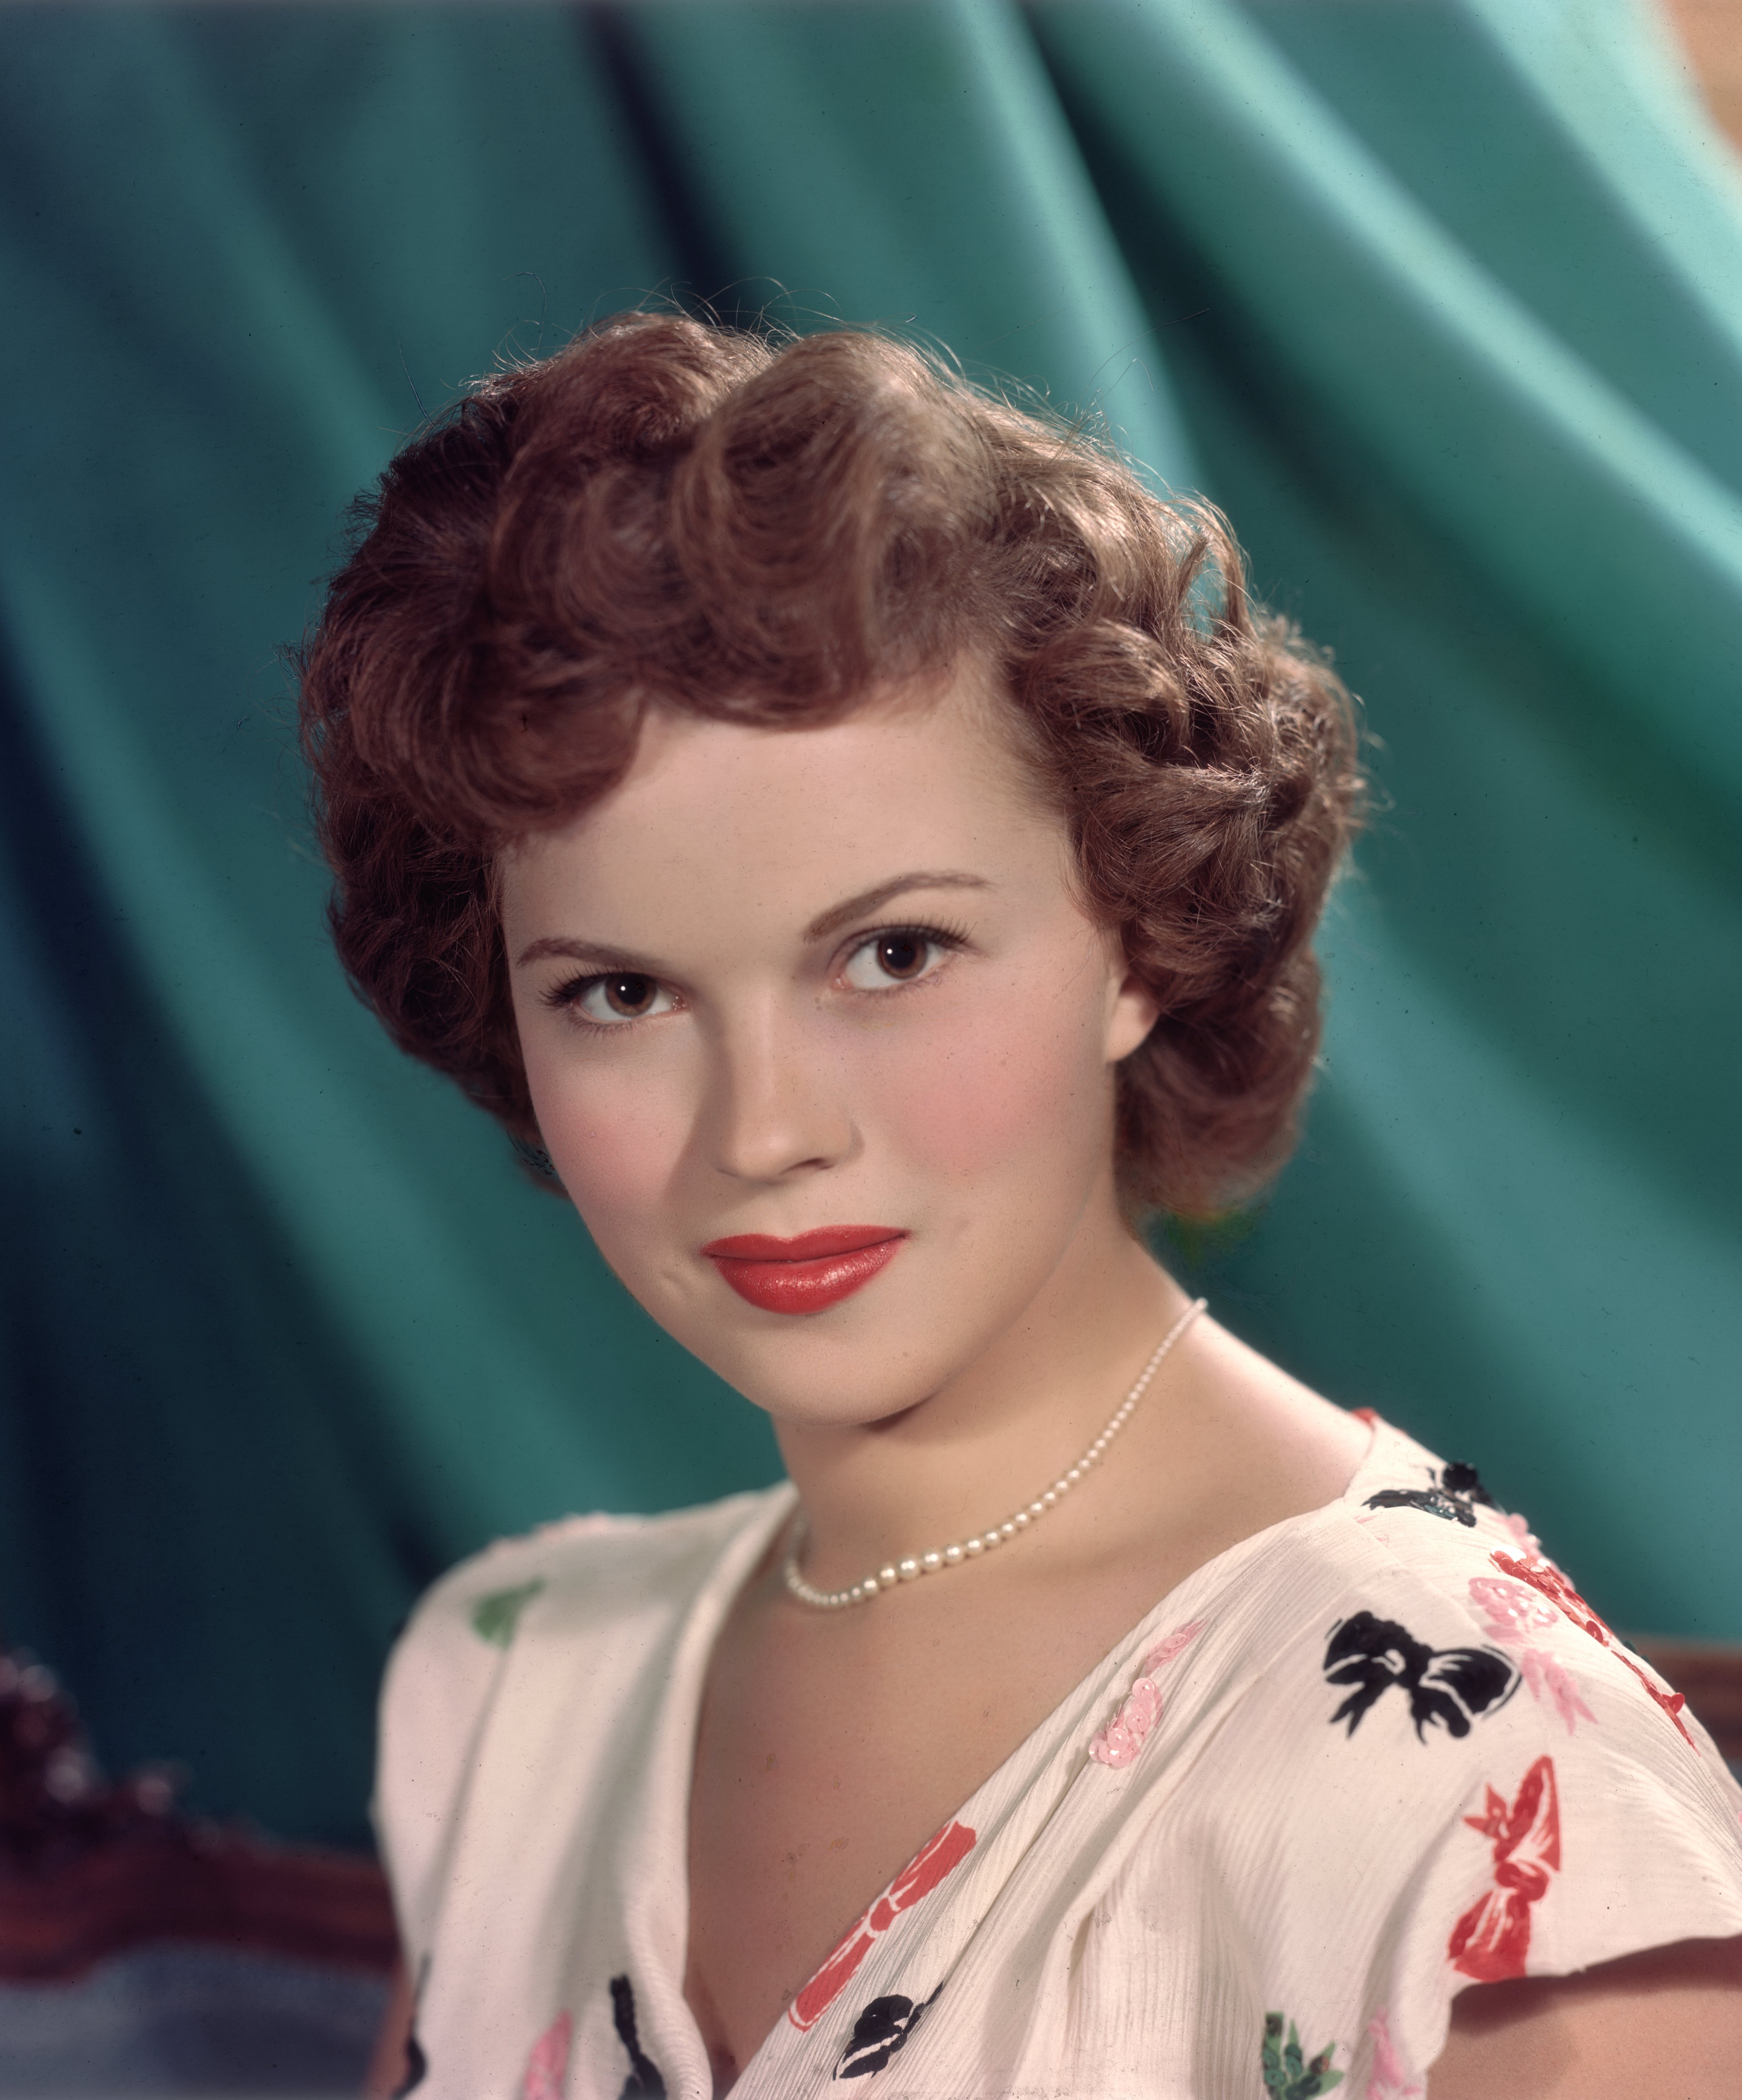  Headshot studio portrait of American actor Shirley Temple, in front of a green backdrop, wearing a short sleeve white blouse with a colored bows pattern and a pearl necklace. circa 1955 | Source: Getty Images